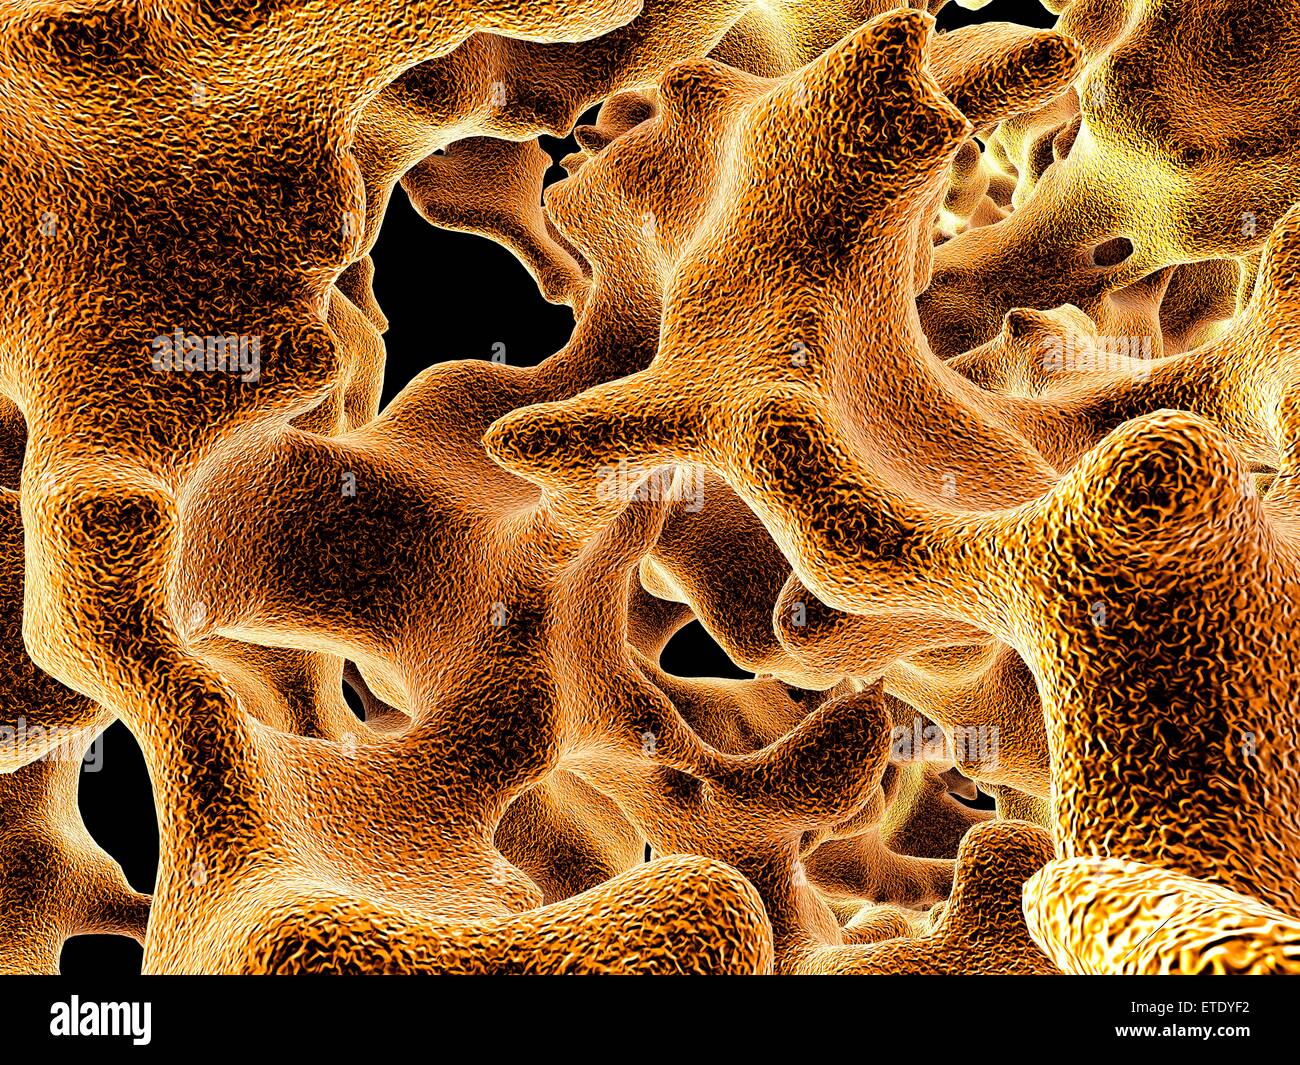 Osteoporosis. Computer artwork of the trabeculae in the cancellous (spongy) bone tissue affected by osteoporosis. The cancellous tissue fills the interior of the bones and in osteoporosis its density decreases, increasing the brittleness of the bones and Stock Photo